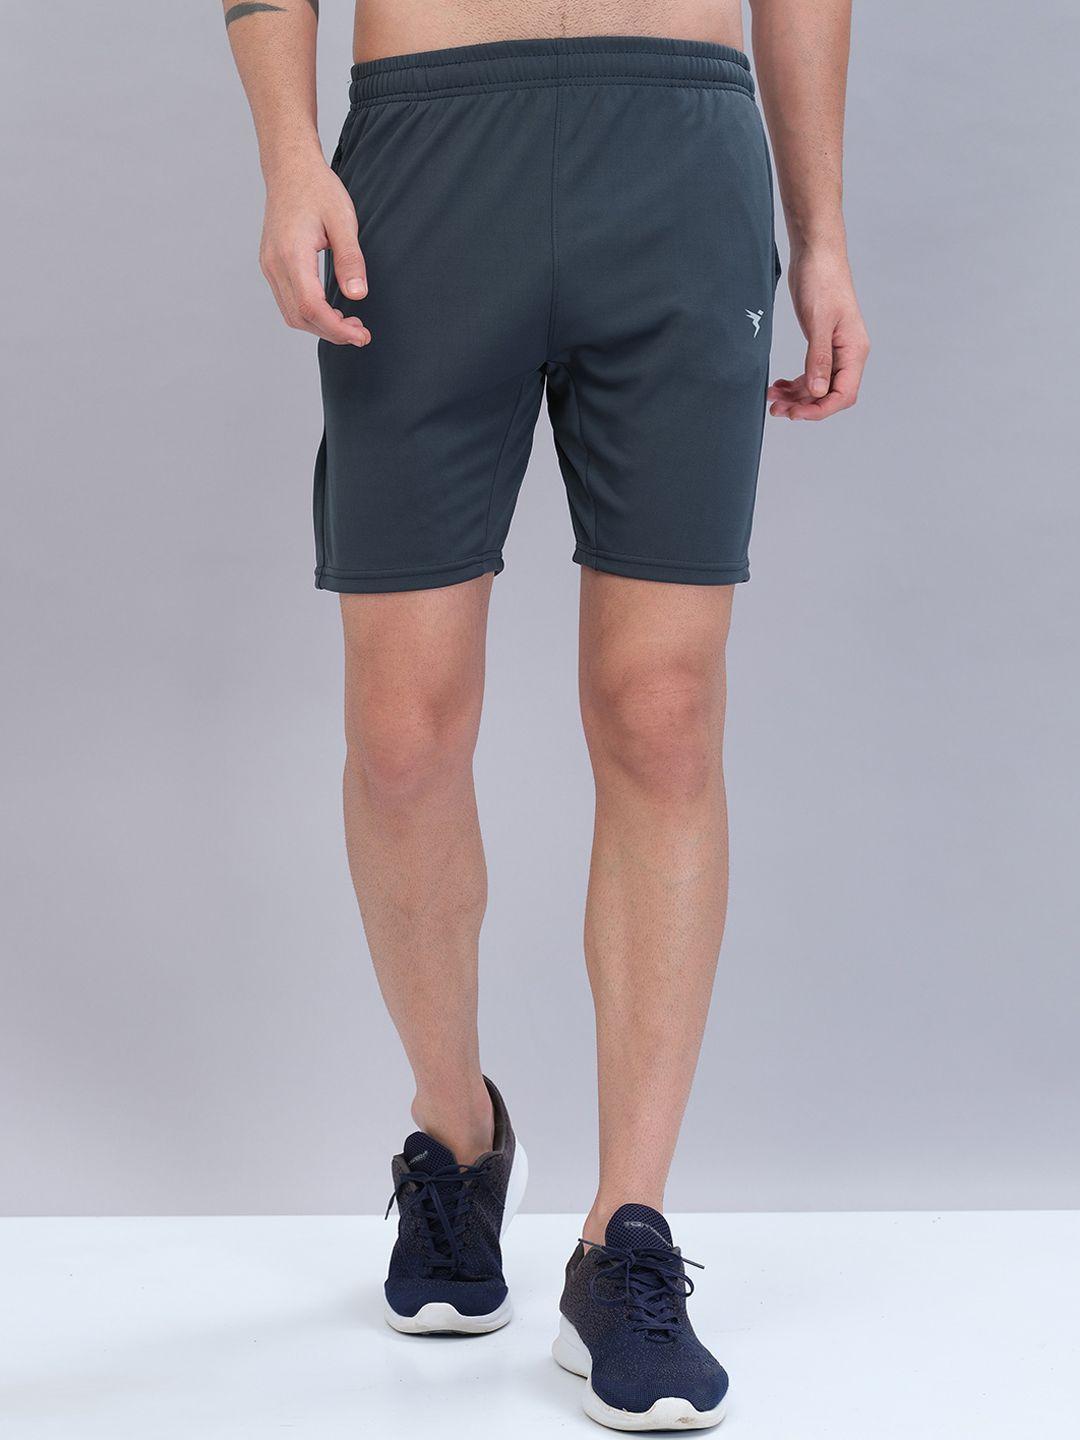 technosport men mid-rise slim fit shorts with antimicrobial technology